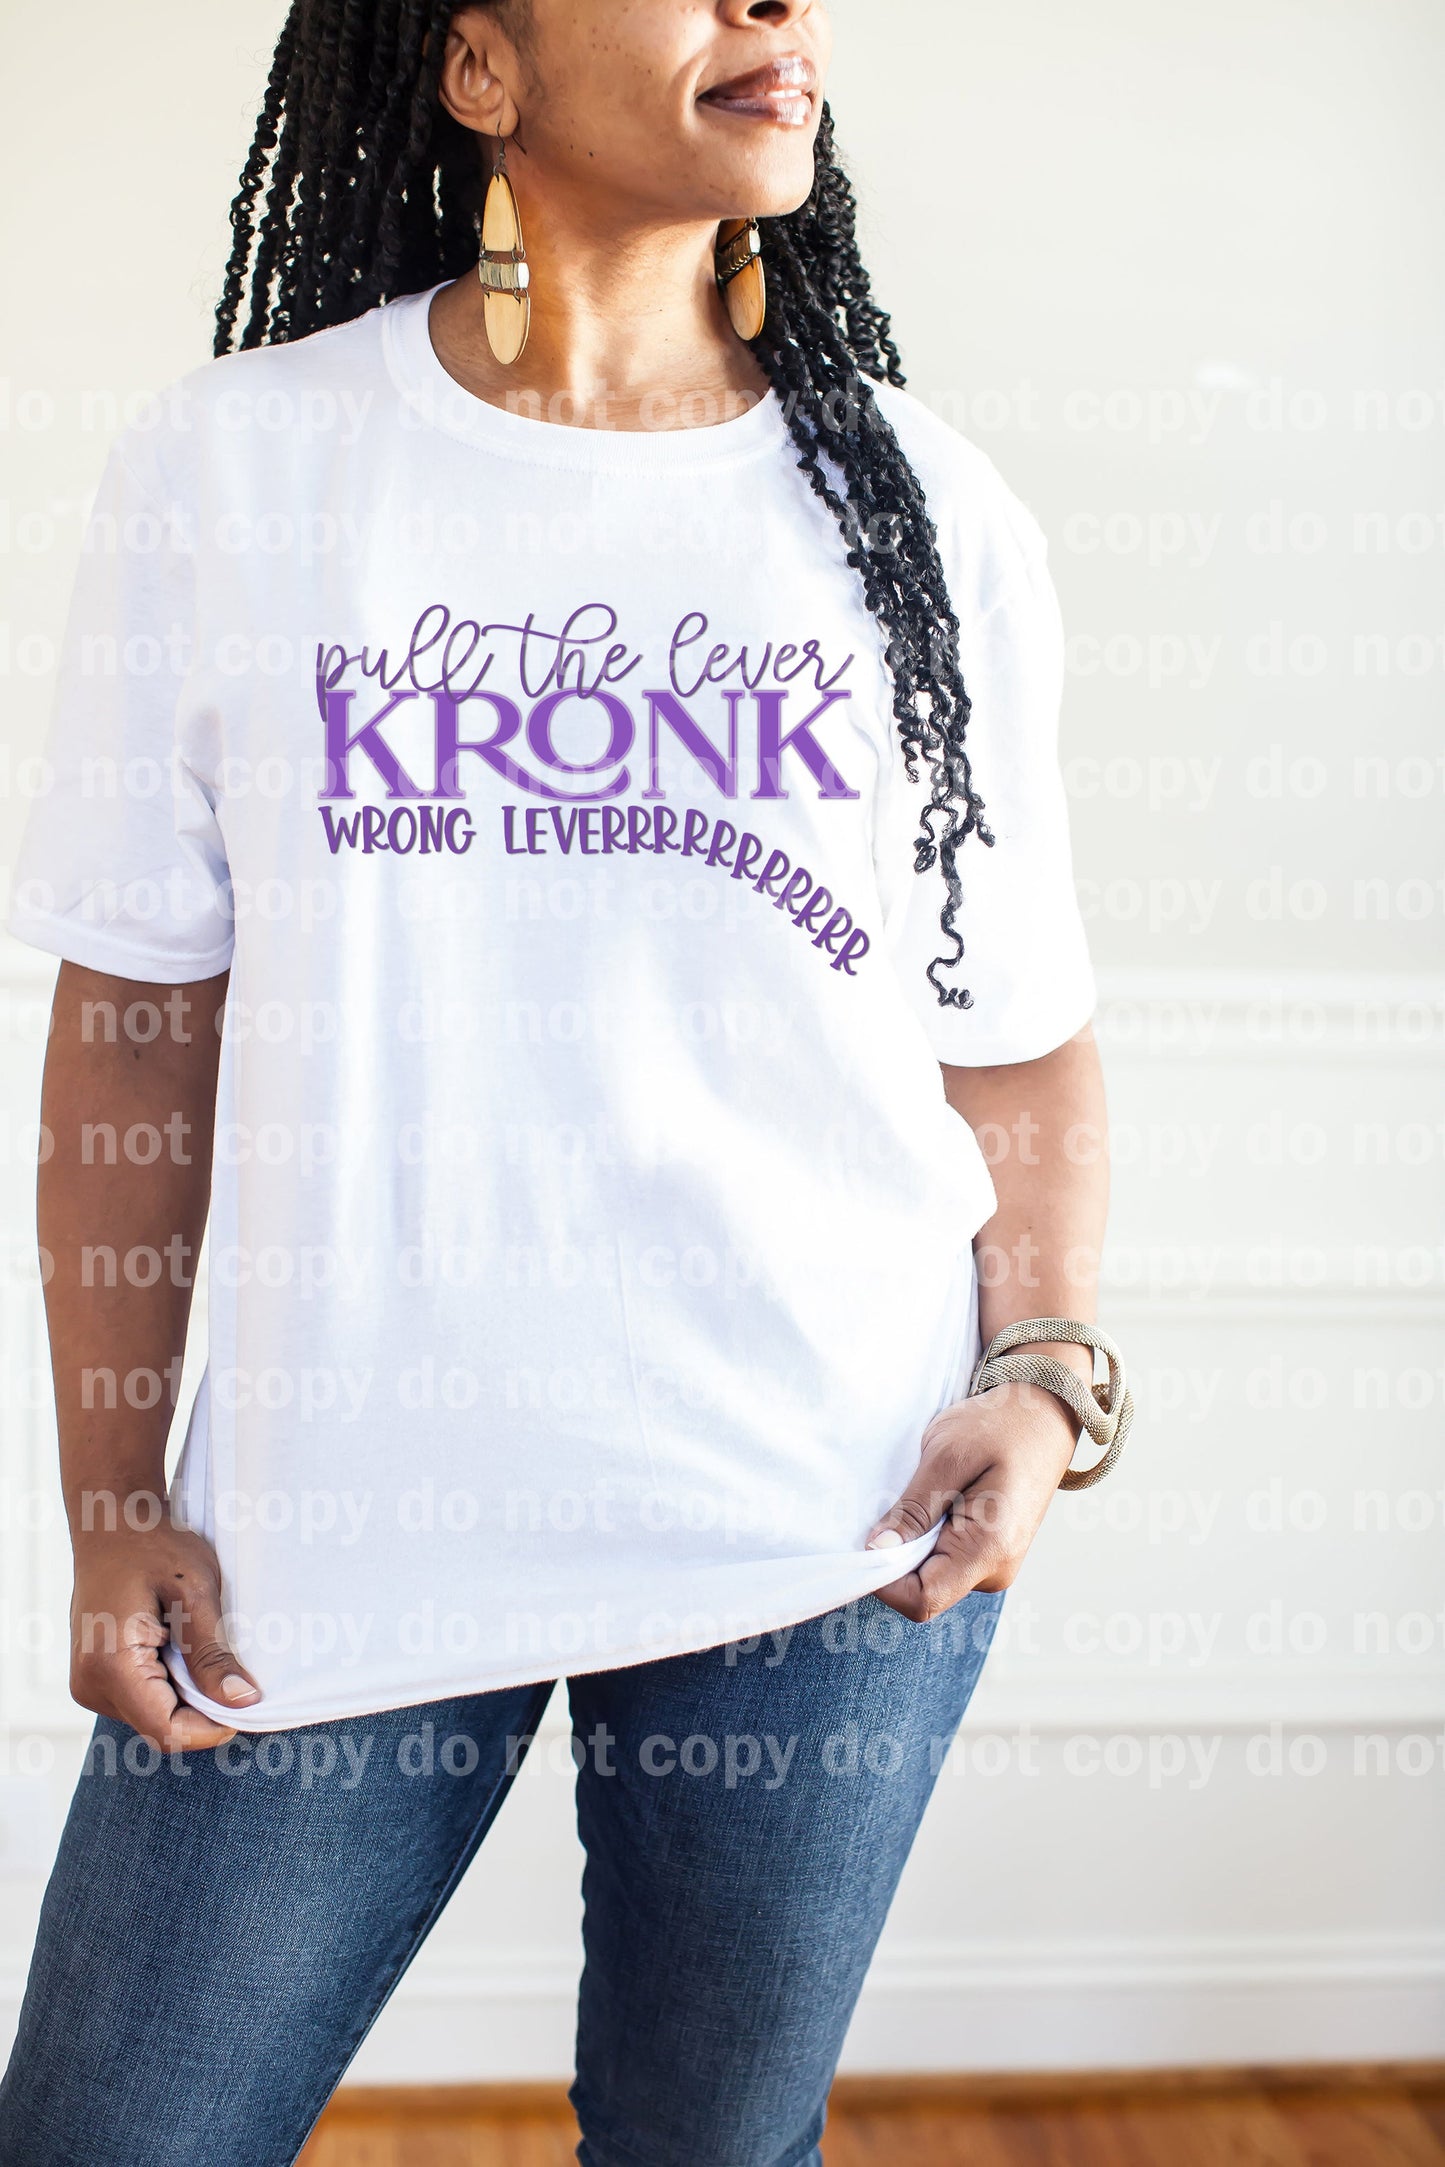 Pull The Lever Kronk Wrong Lever Dream Print or Sublimation Print